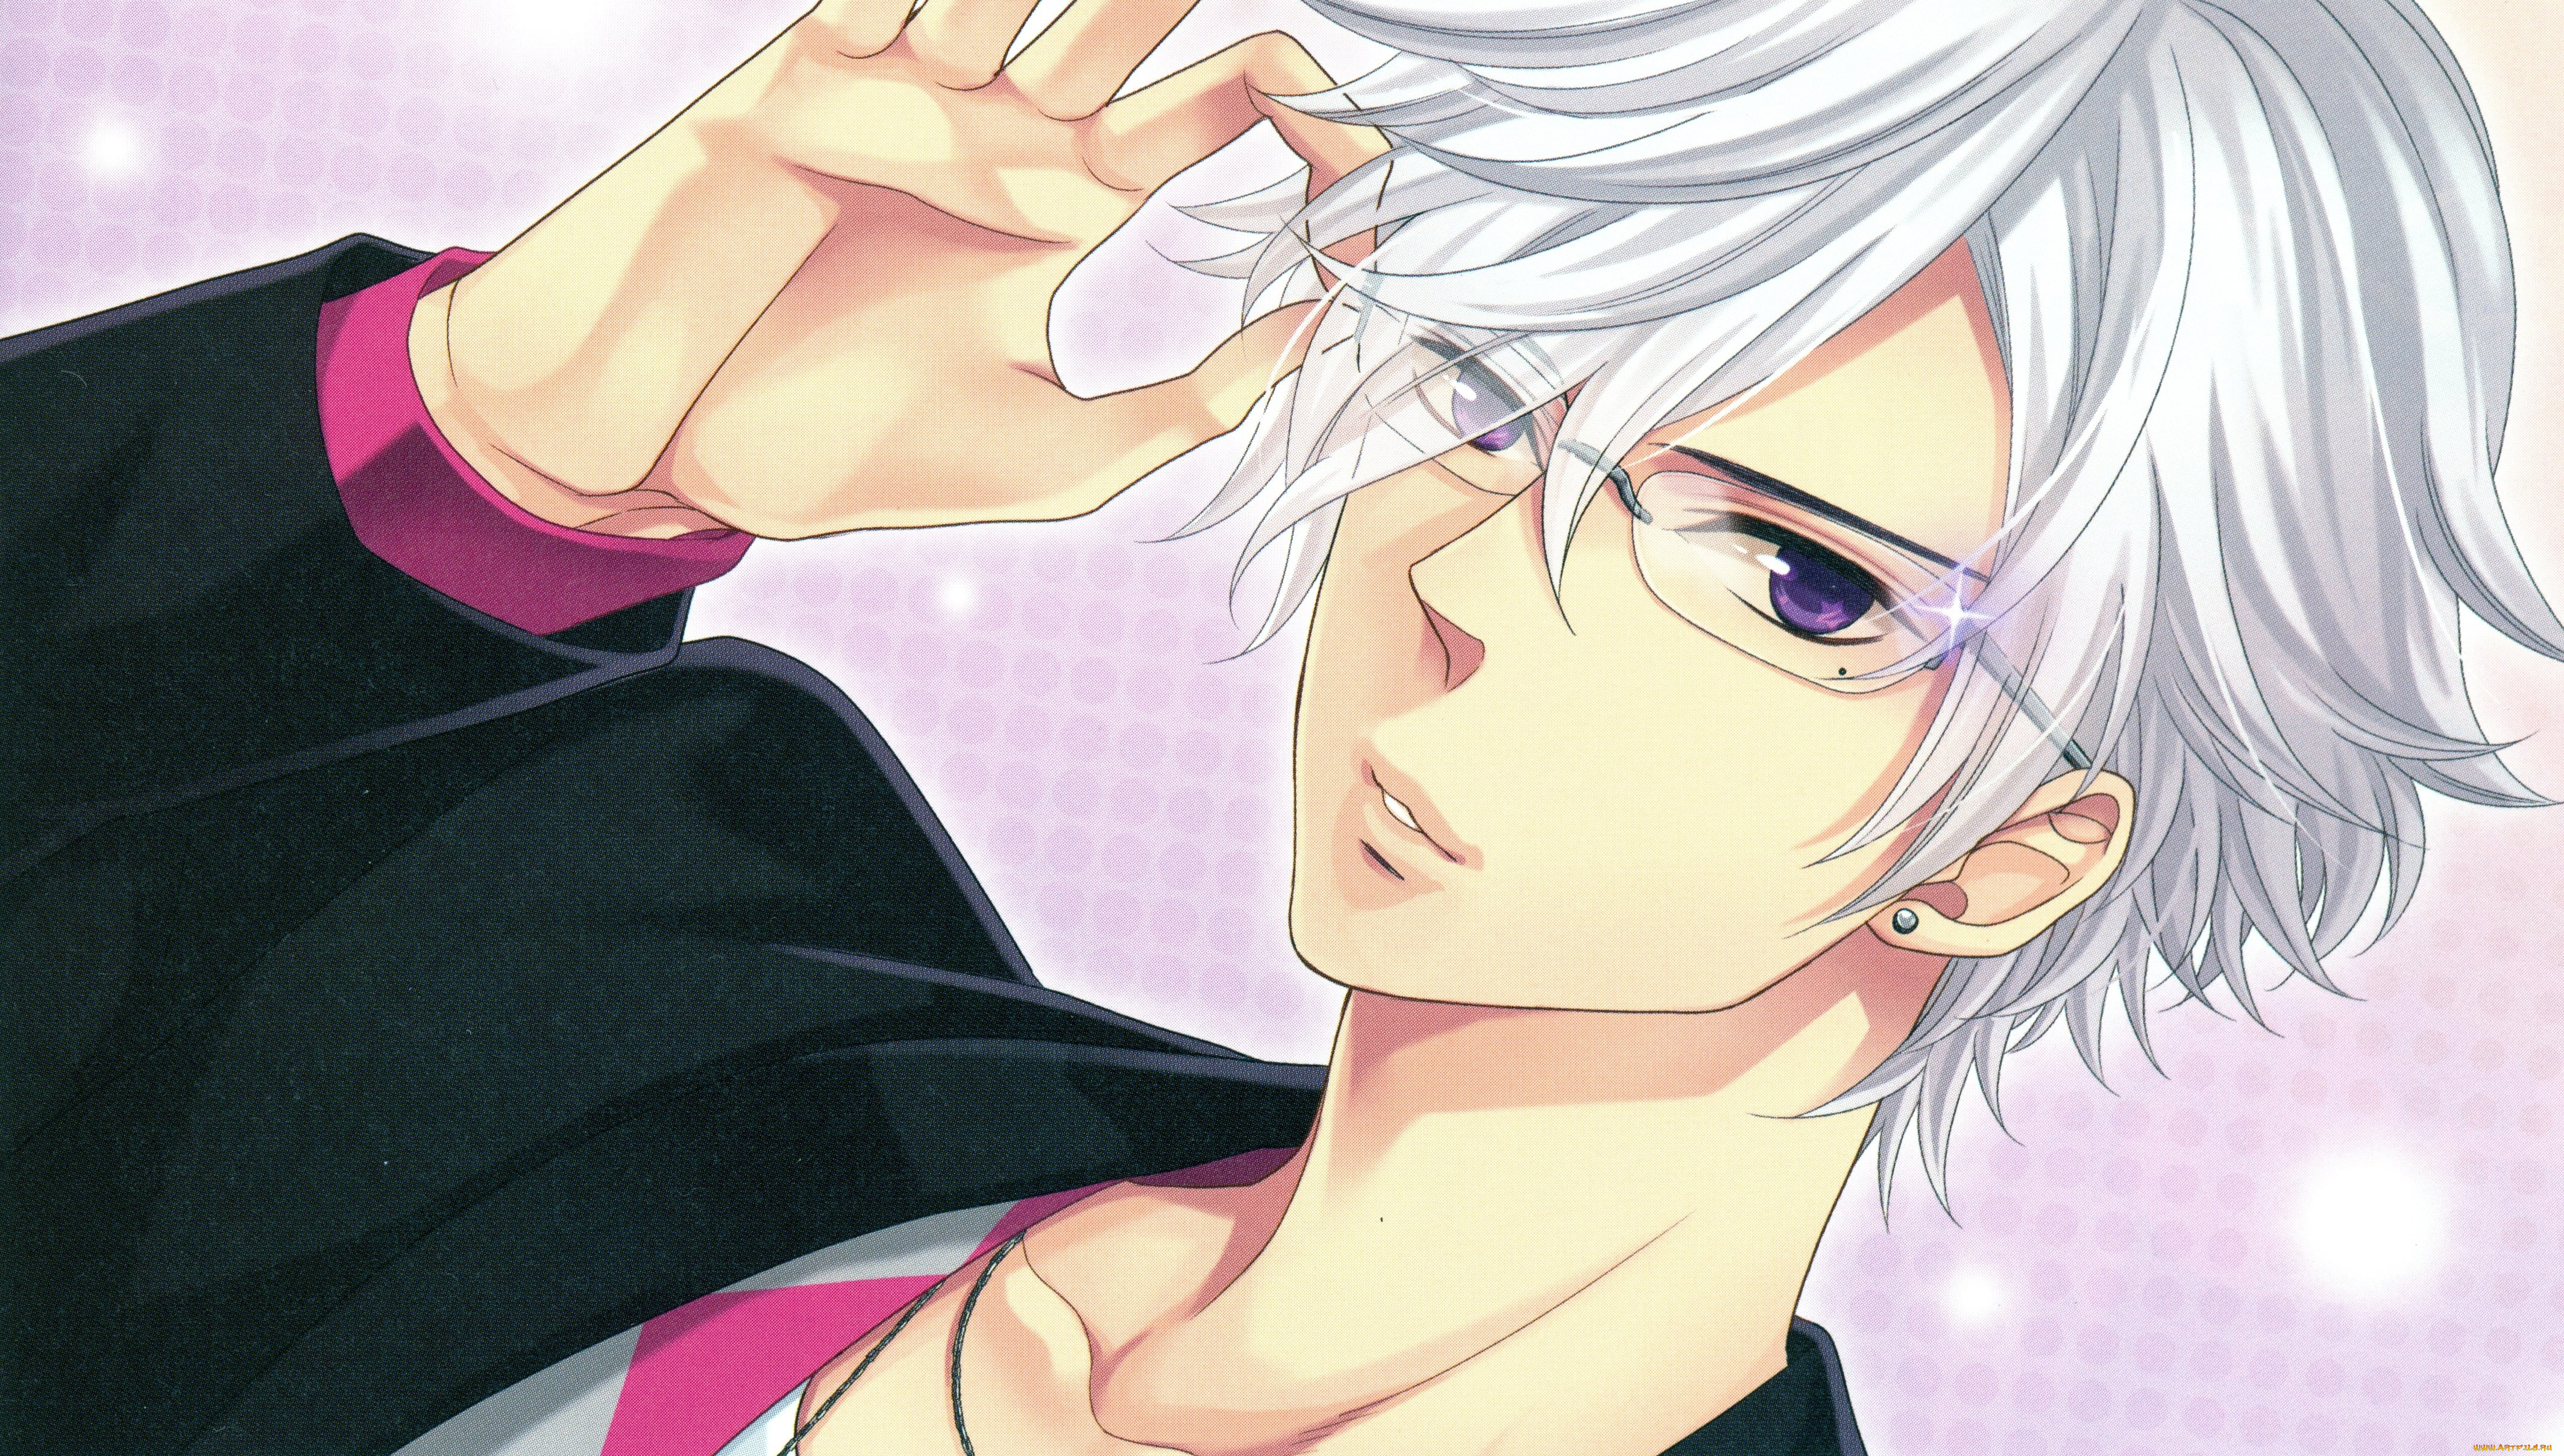 , brothers conflict, 